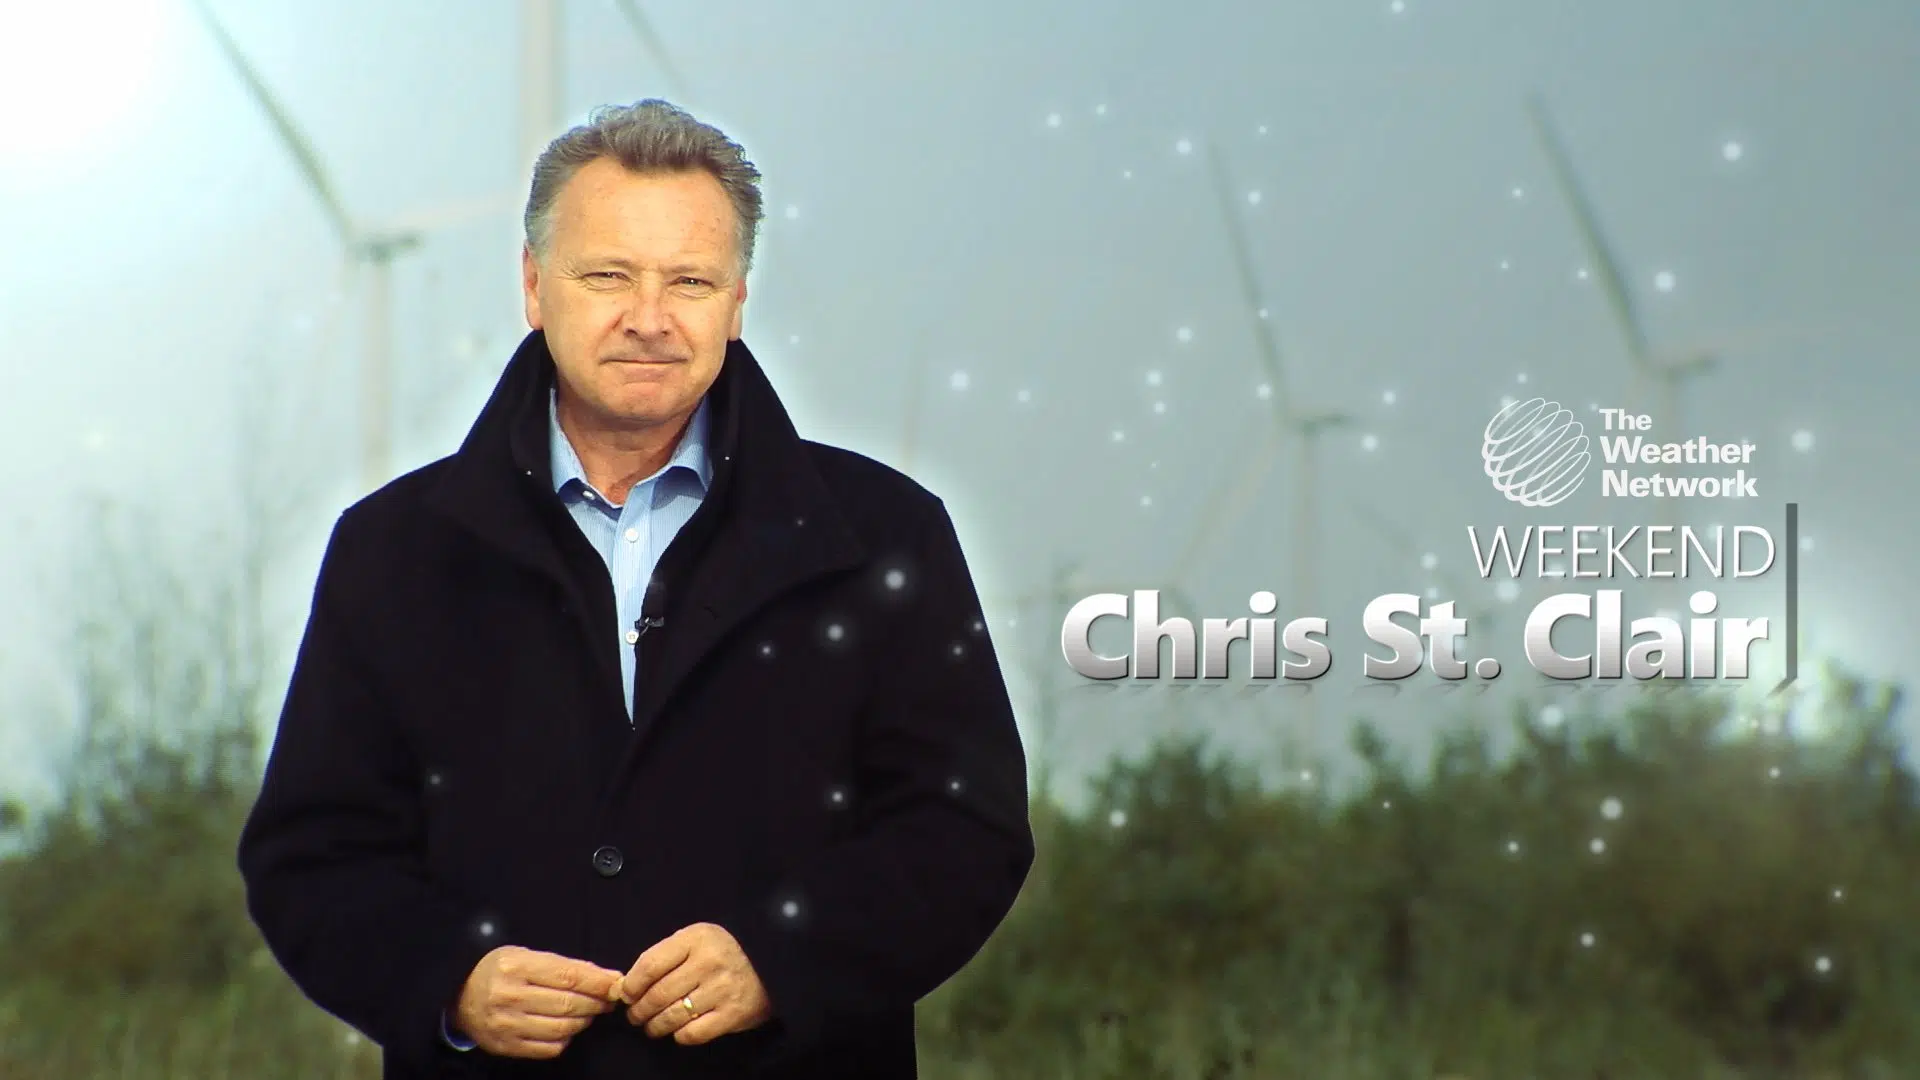 Chris St Clair's Last Weekend On The Weather Network